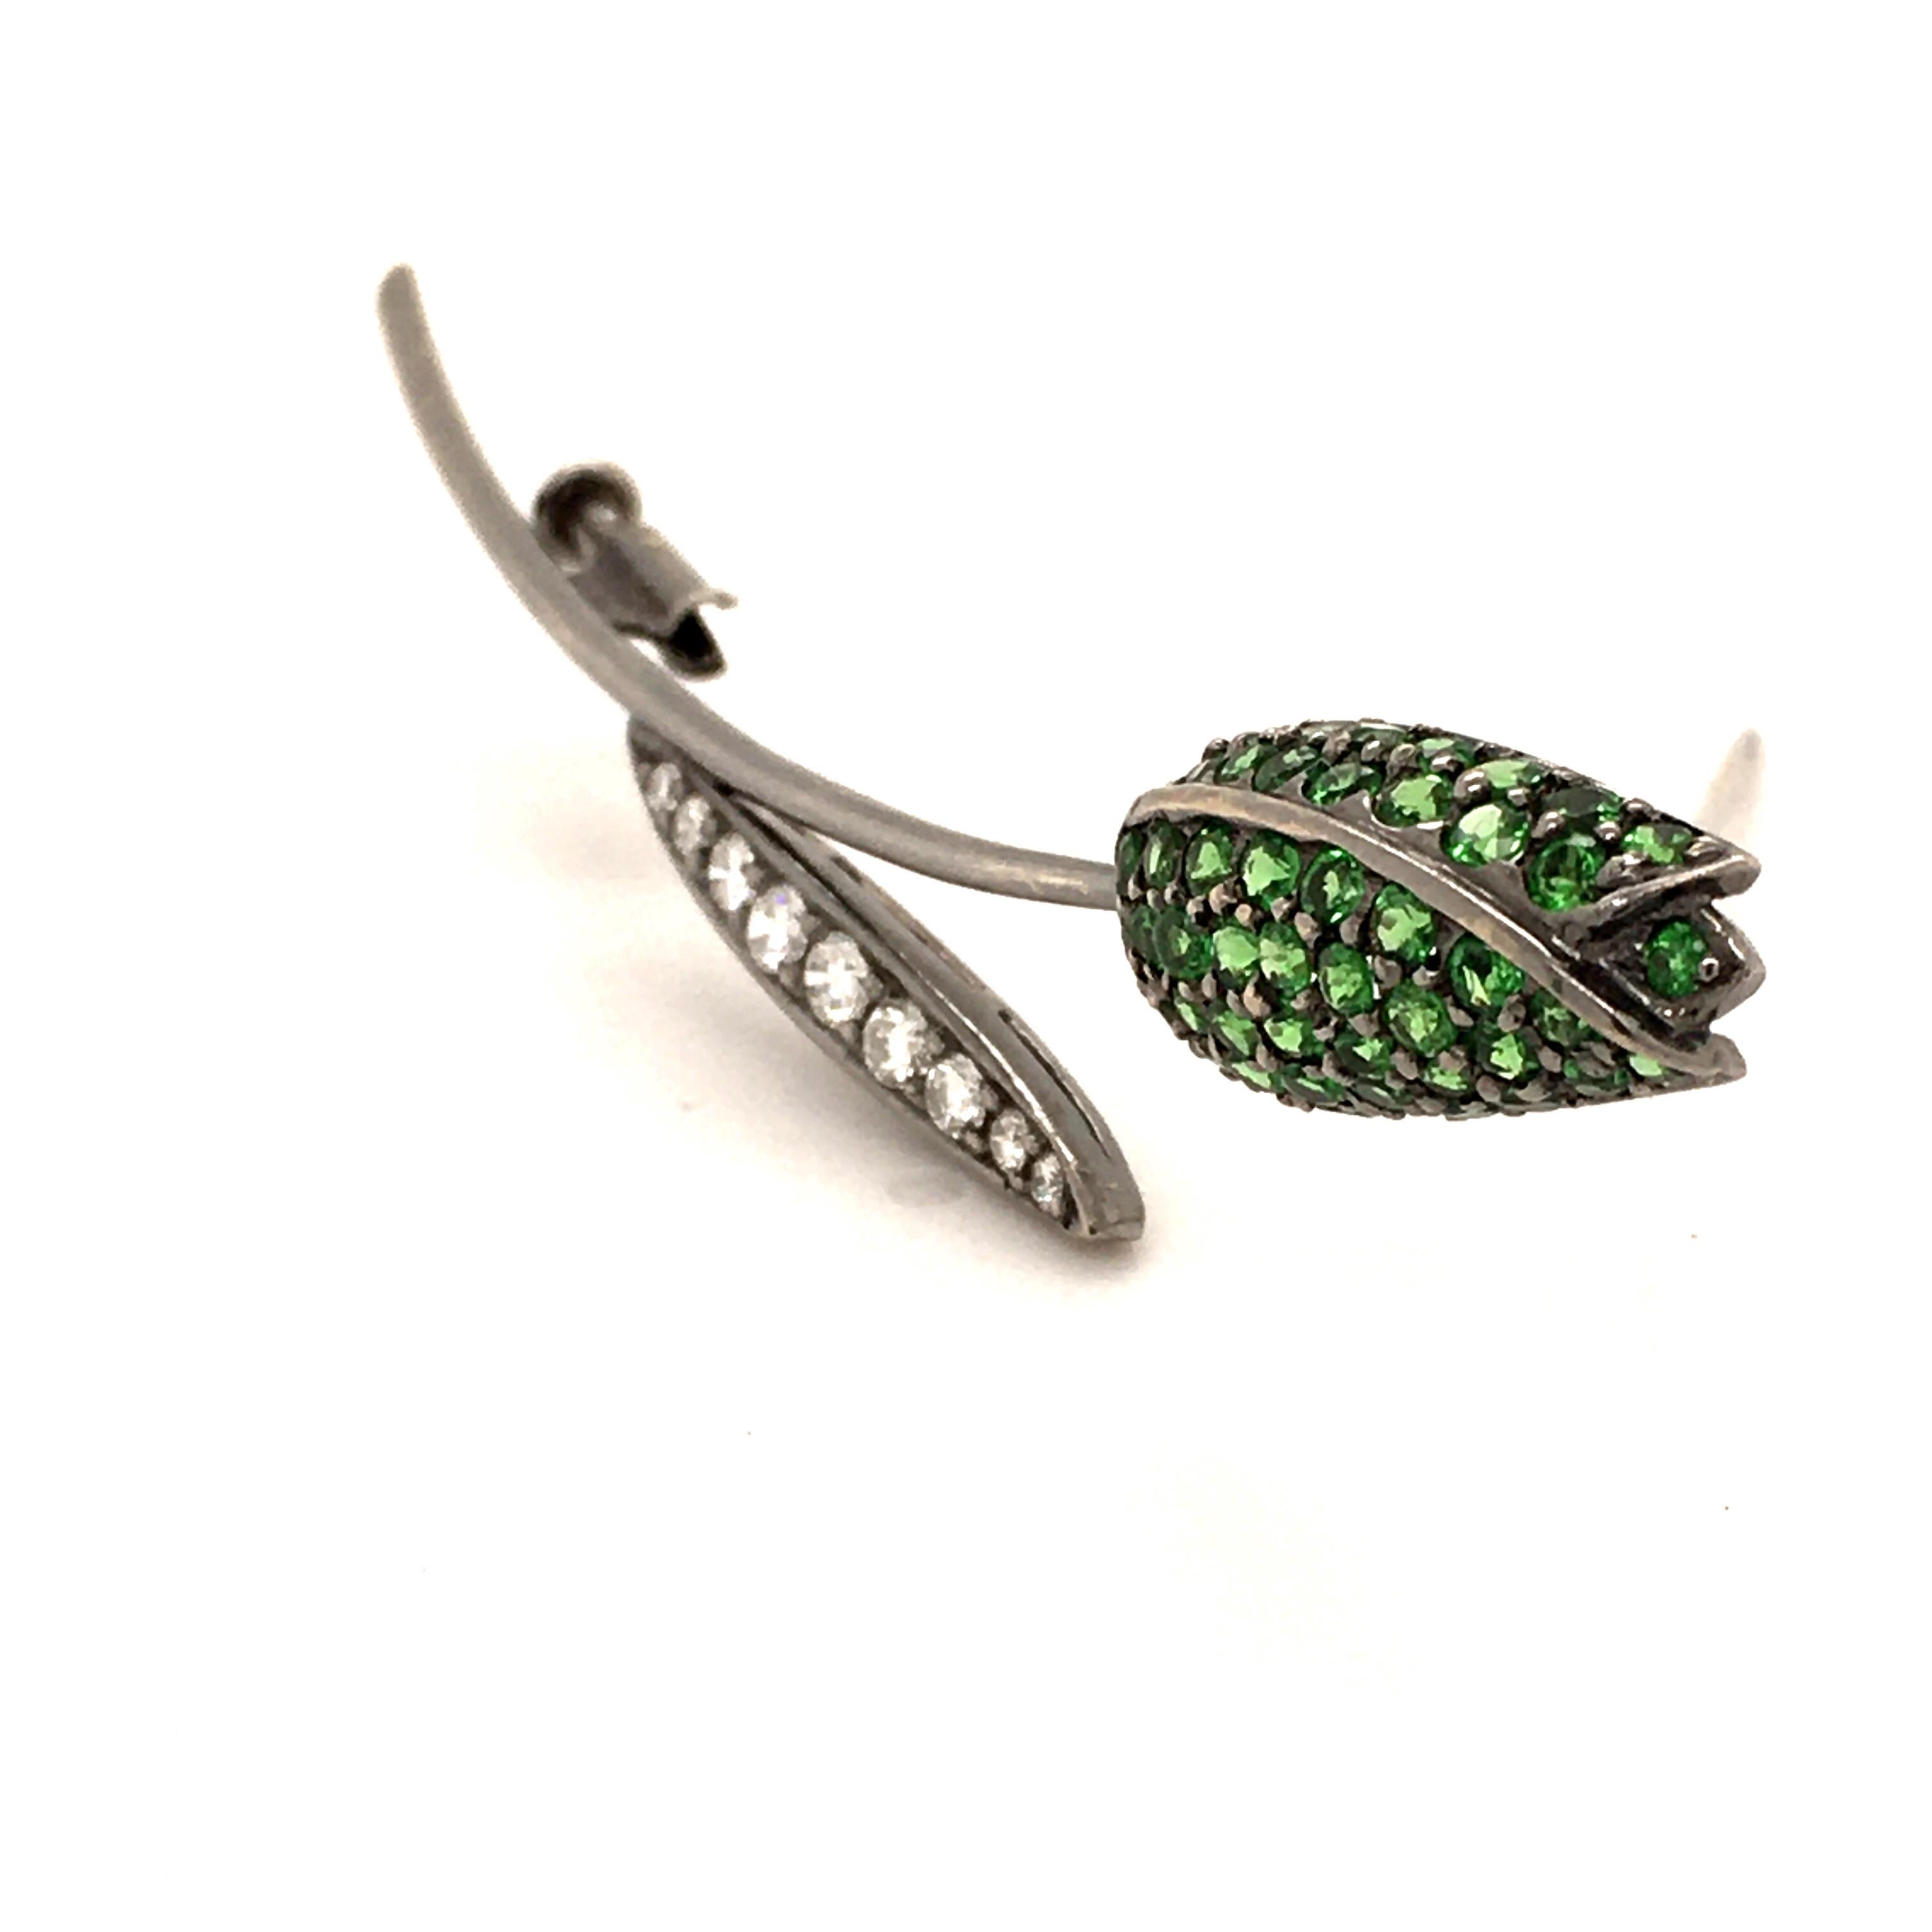 Elegant Tulip brooch in blackened white gold 18 Karat – meaning the piece of jewellery is plated with a black rhodium finish to give it it’s dark look. The petals are carefully set with 53 brilliant-cut, vibrant green tsavorites totalling 2.70 ct.